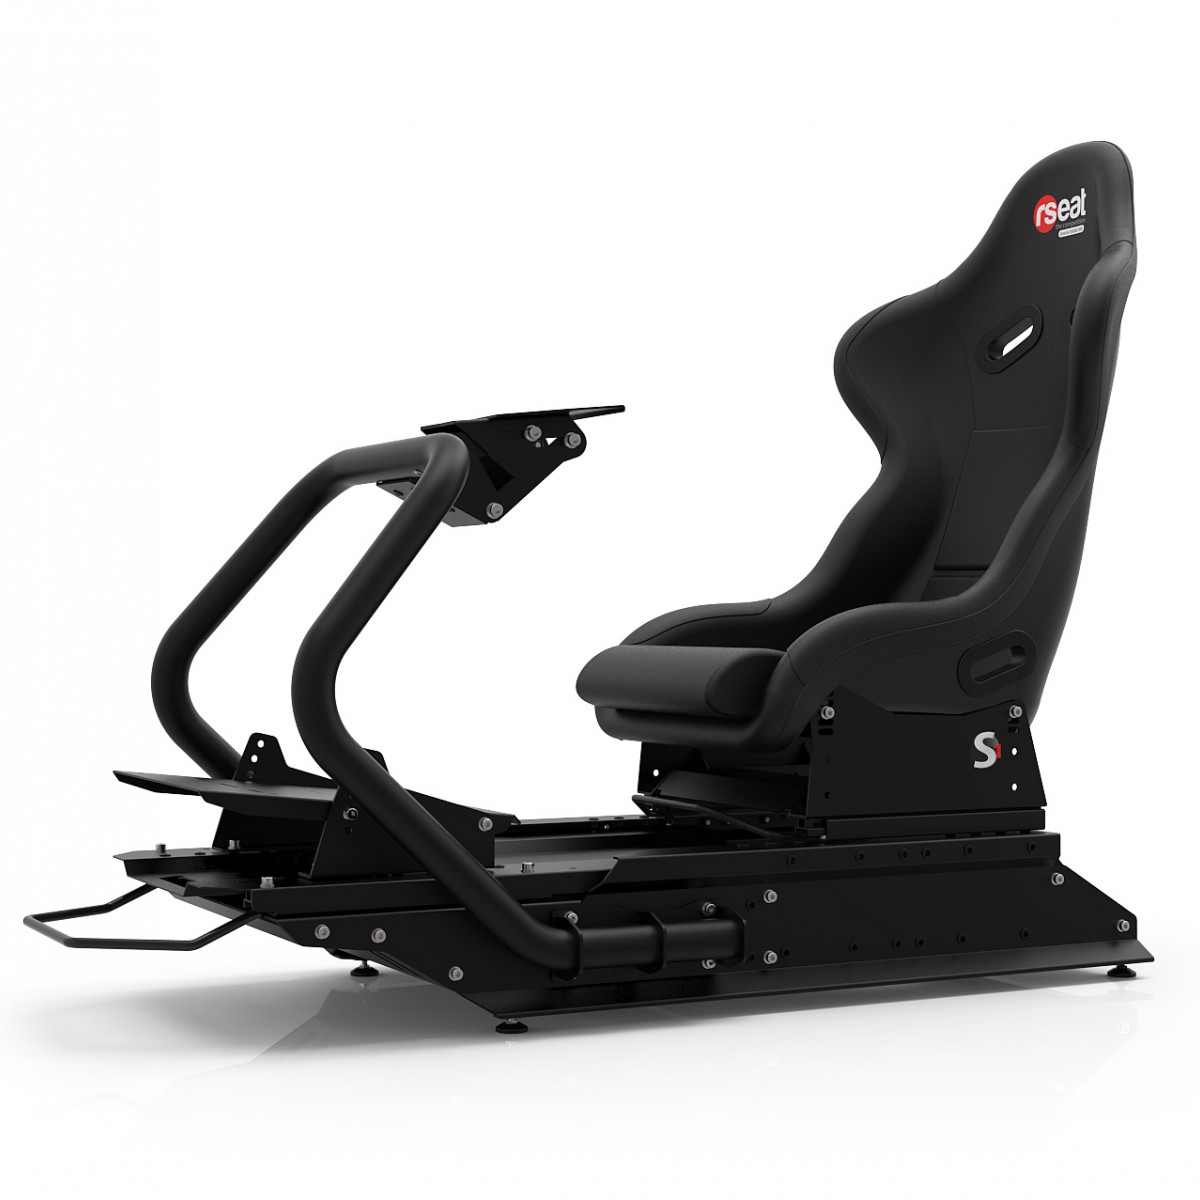 rseat s1